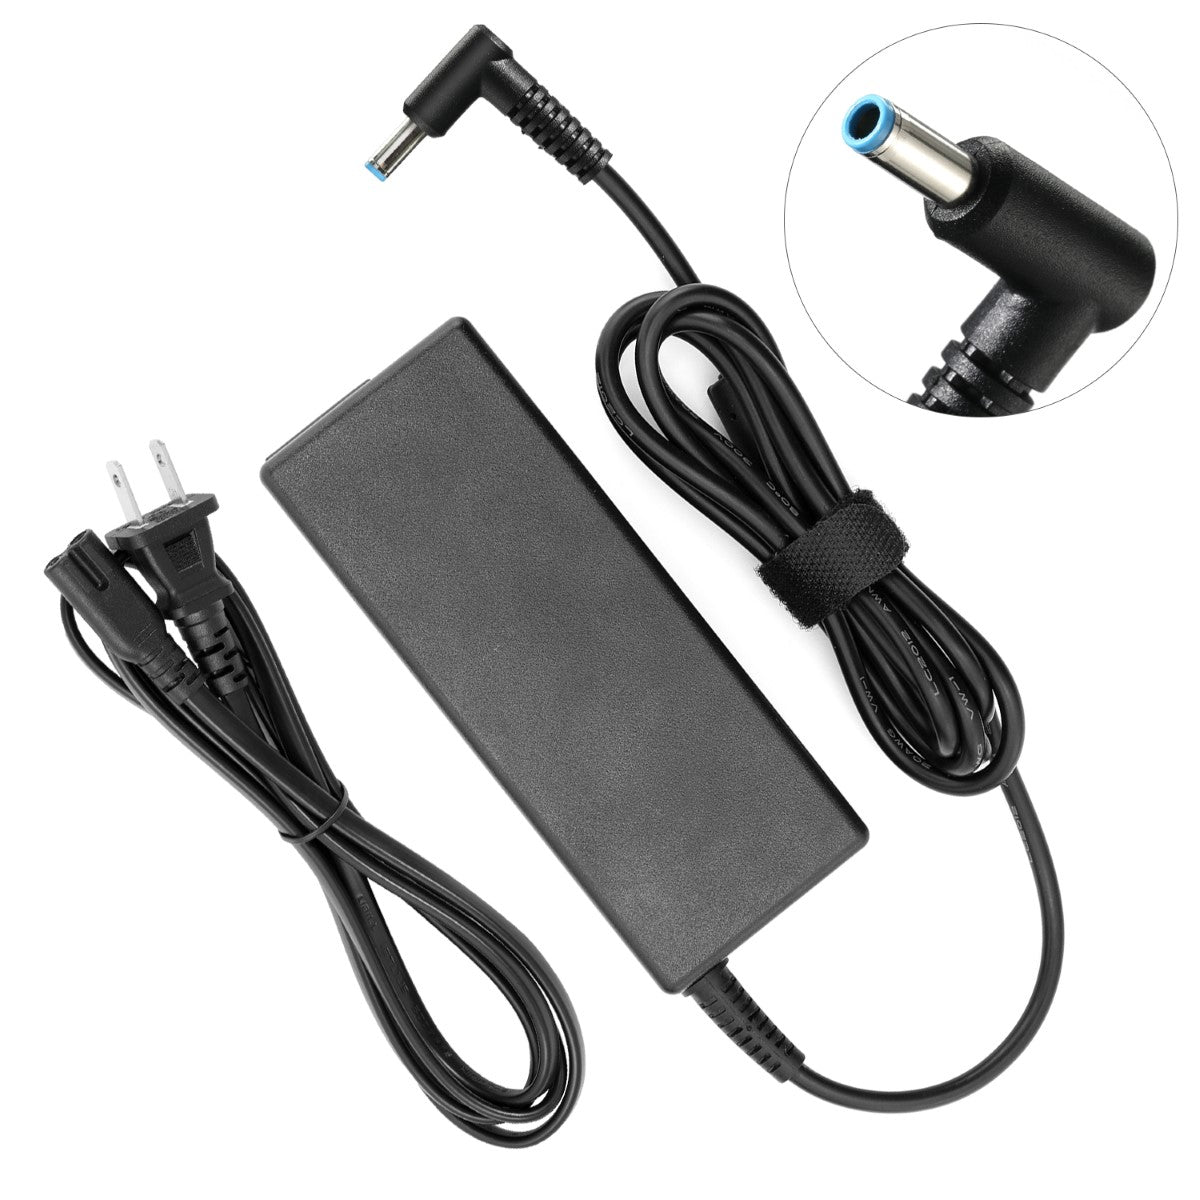 AC Adapter Charger for HP Envy TouchSmart 17-j027cl Notebook.